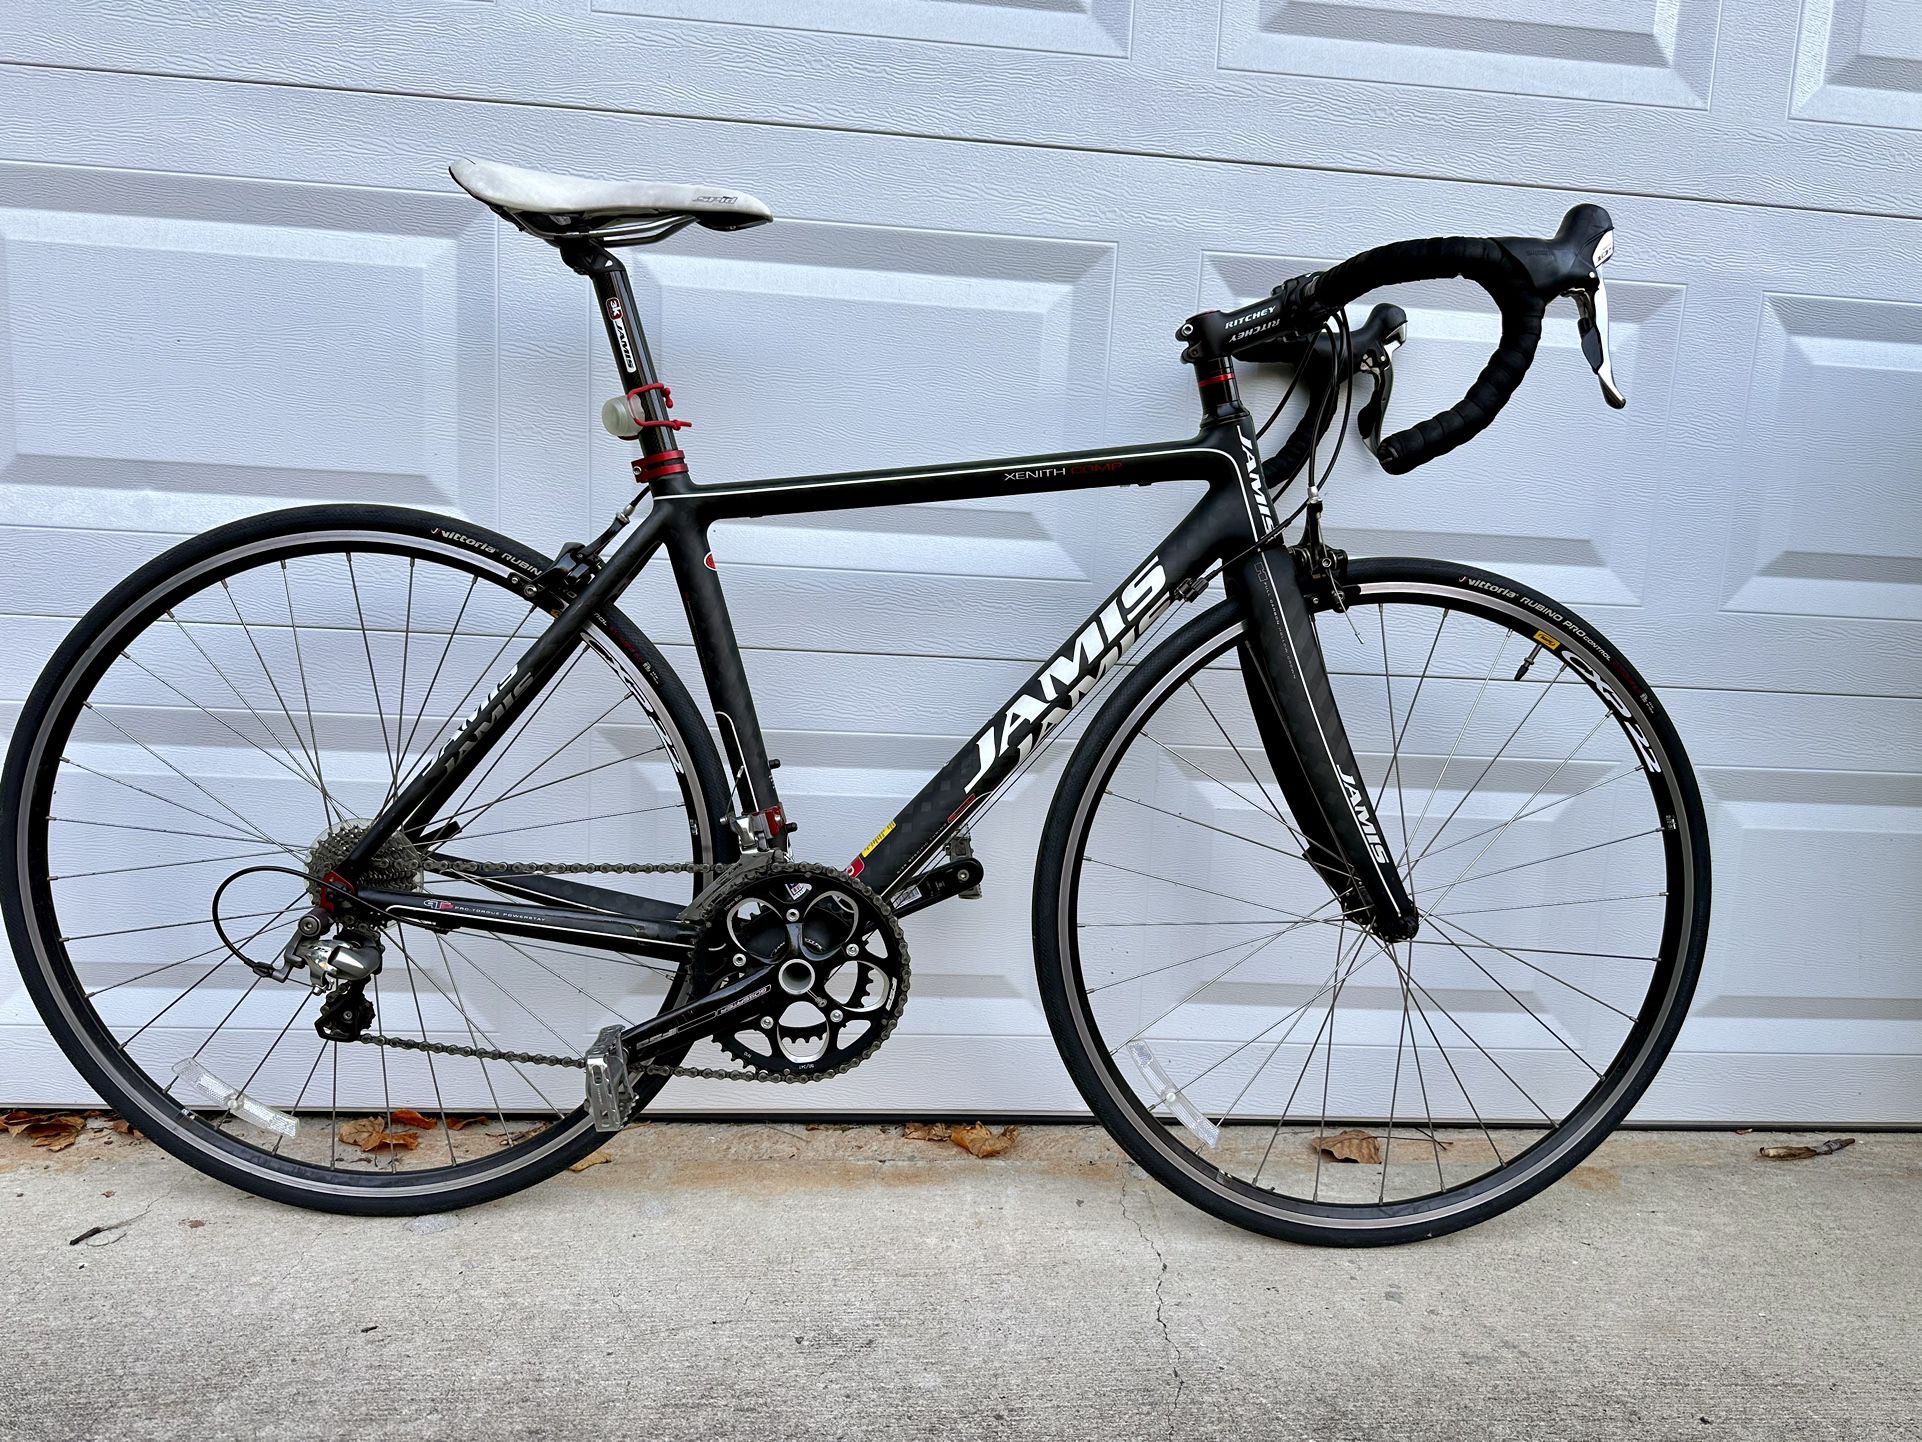 Jamis XENITH COMP 2012 Carbon Frame Road Bike